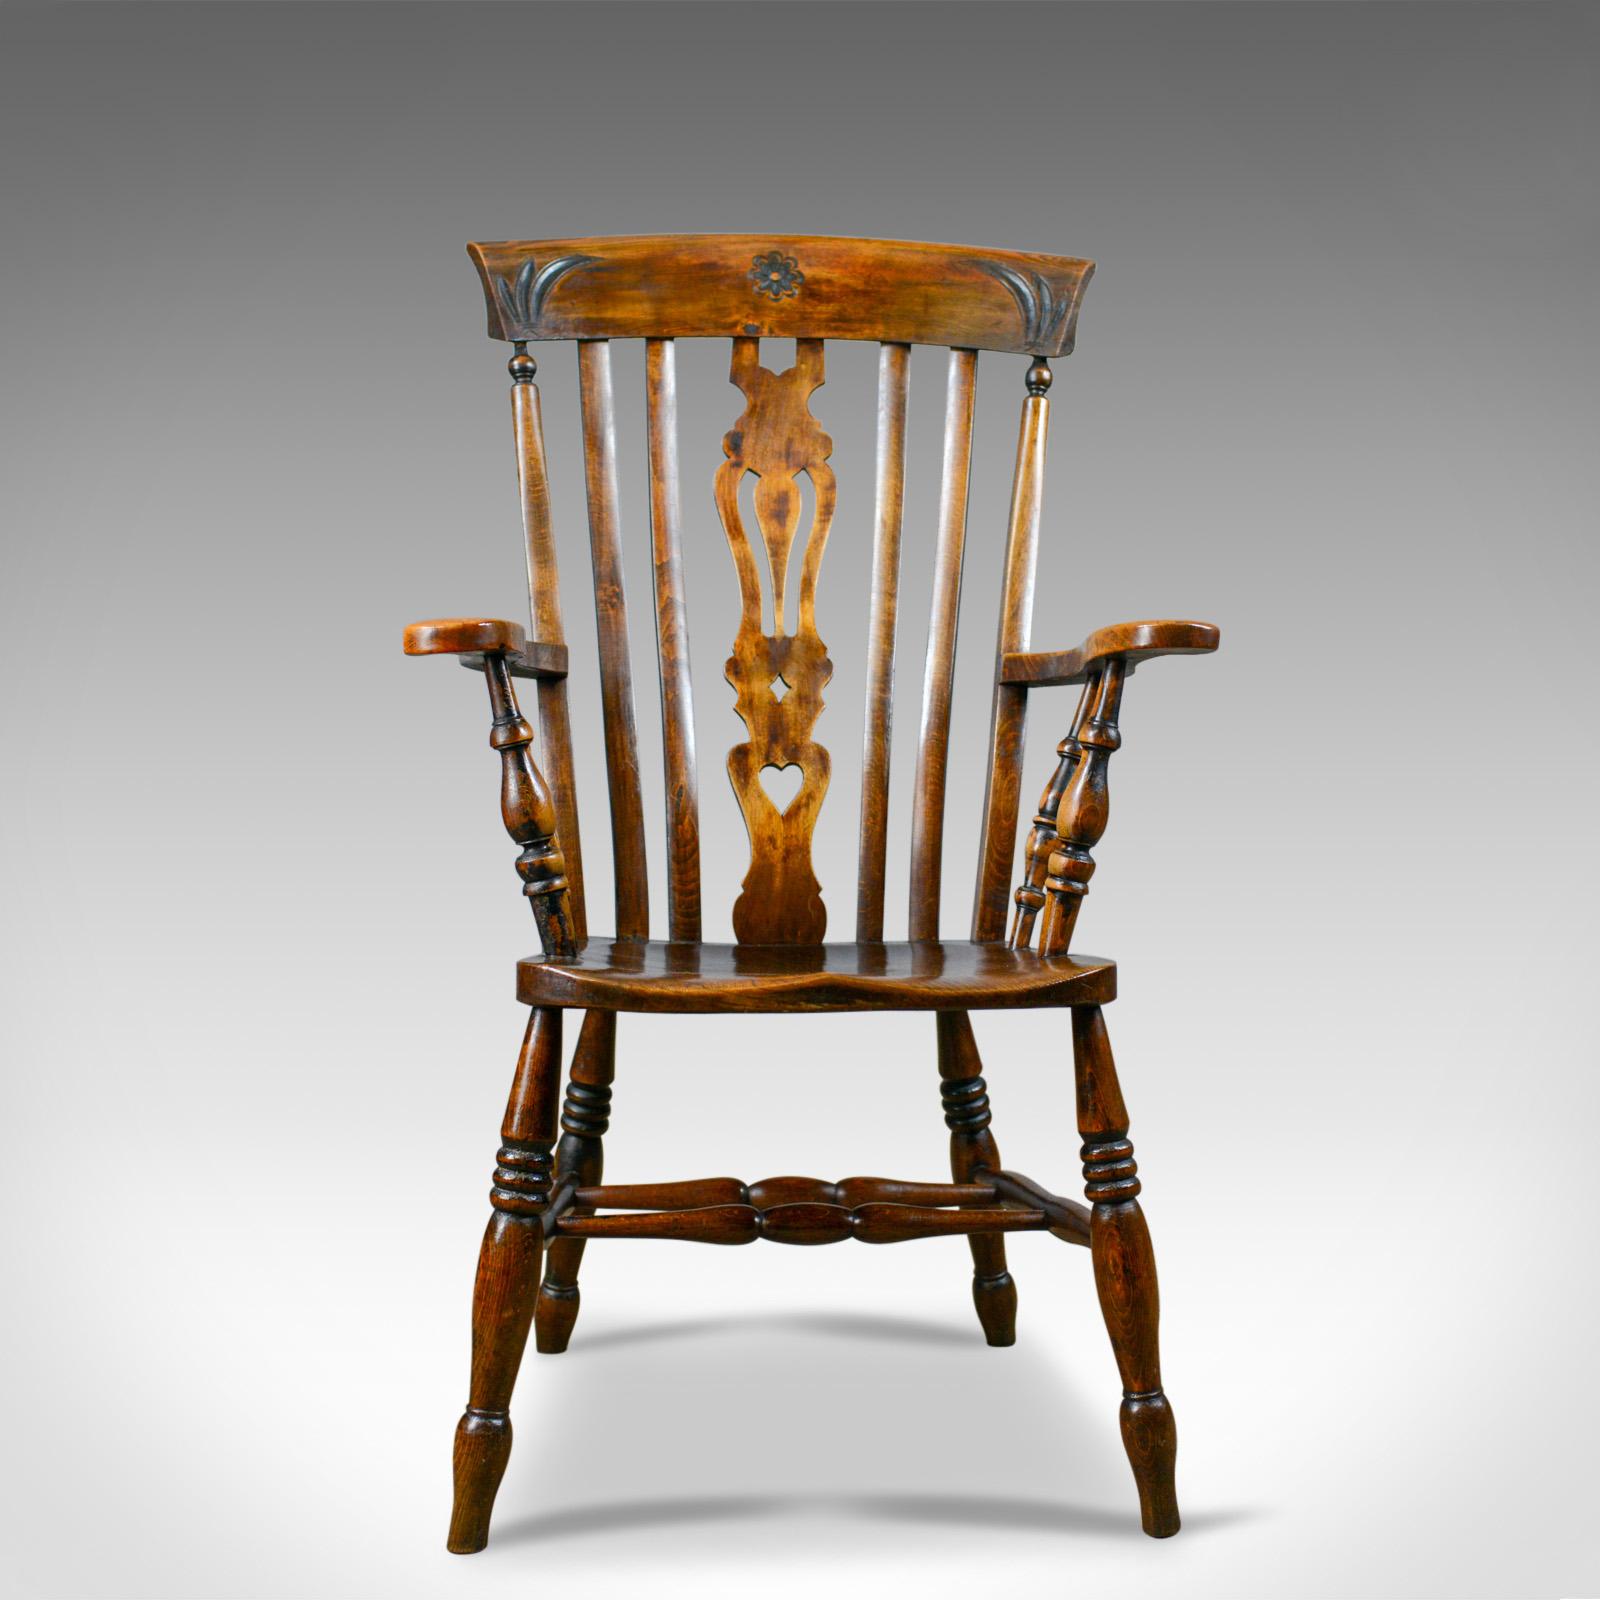 This is an antique elbow chair. An Edwardian, country kitchen, Windsor, lath back, armchair in beech, dating to the early 20th century, circa 1910.

Super chair in fine order throughout
Classic, lath back flanking pierced splat
Good color and a